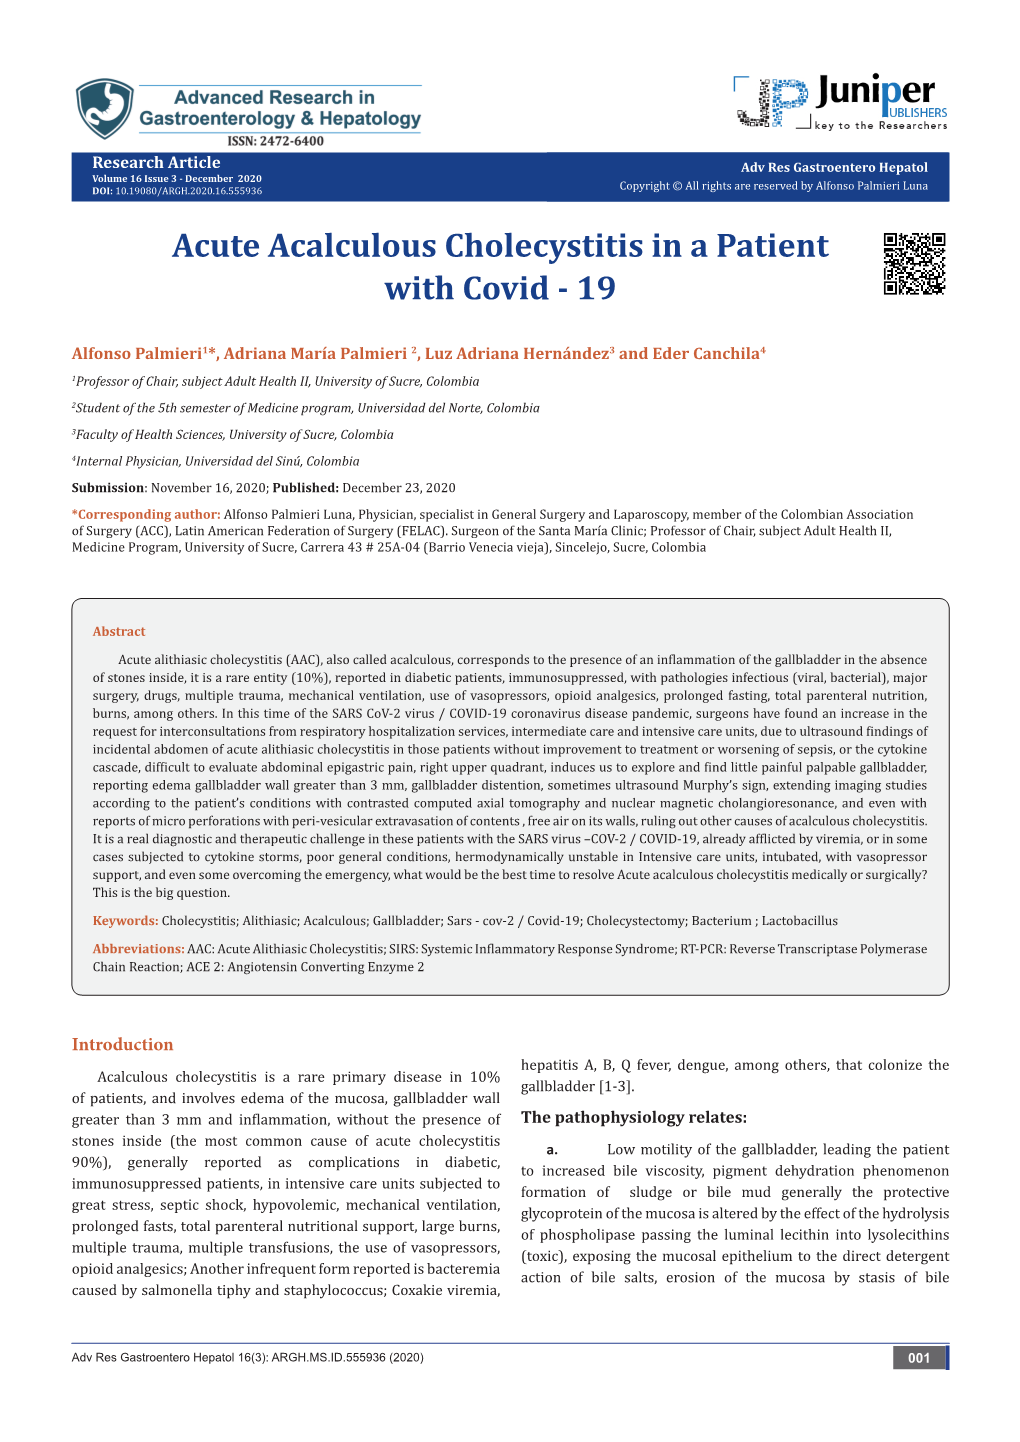 Acute Acalculous Cholecystitis in a Patient with Covid - 19